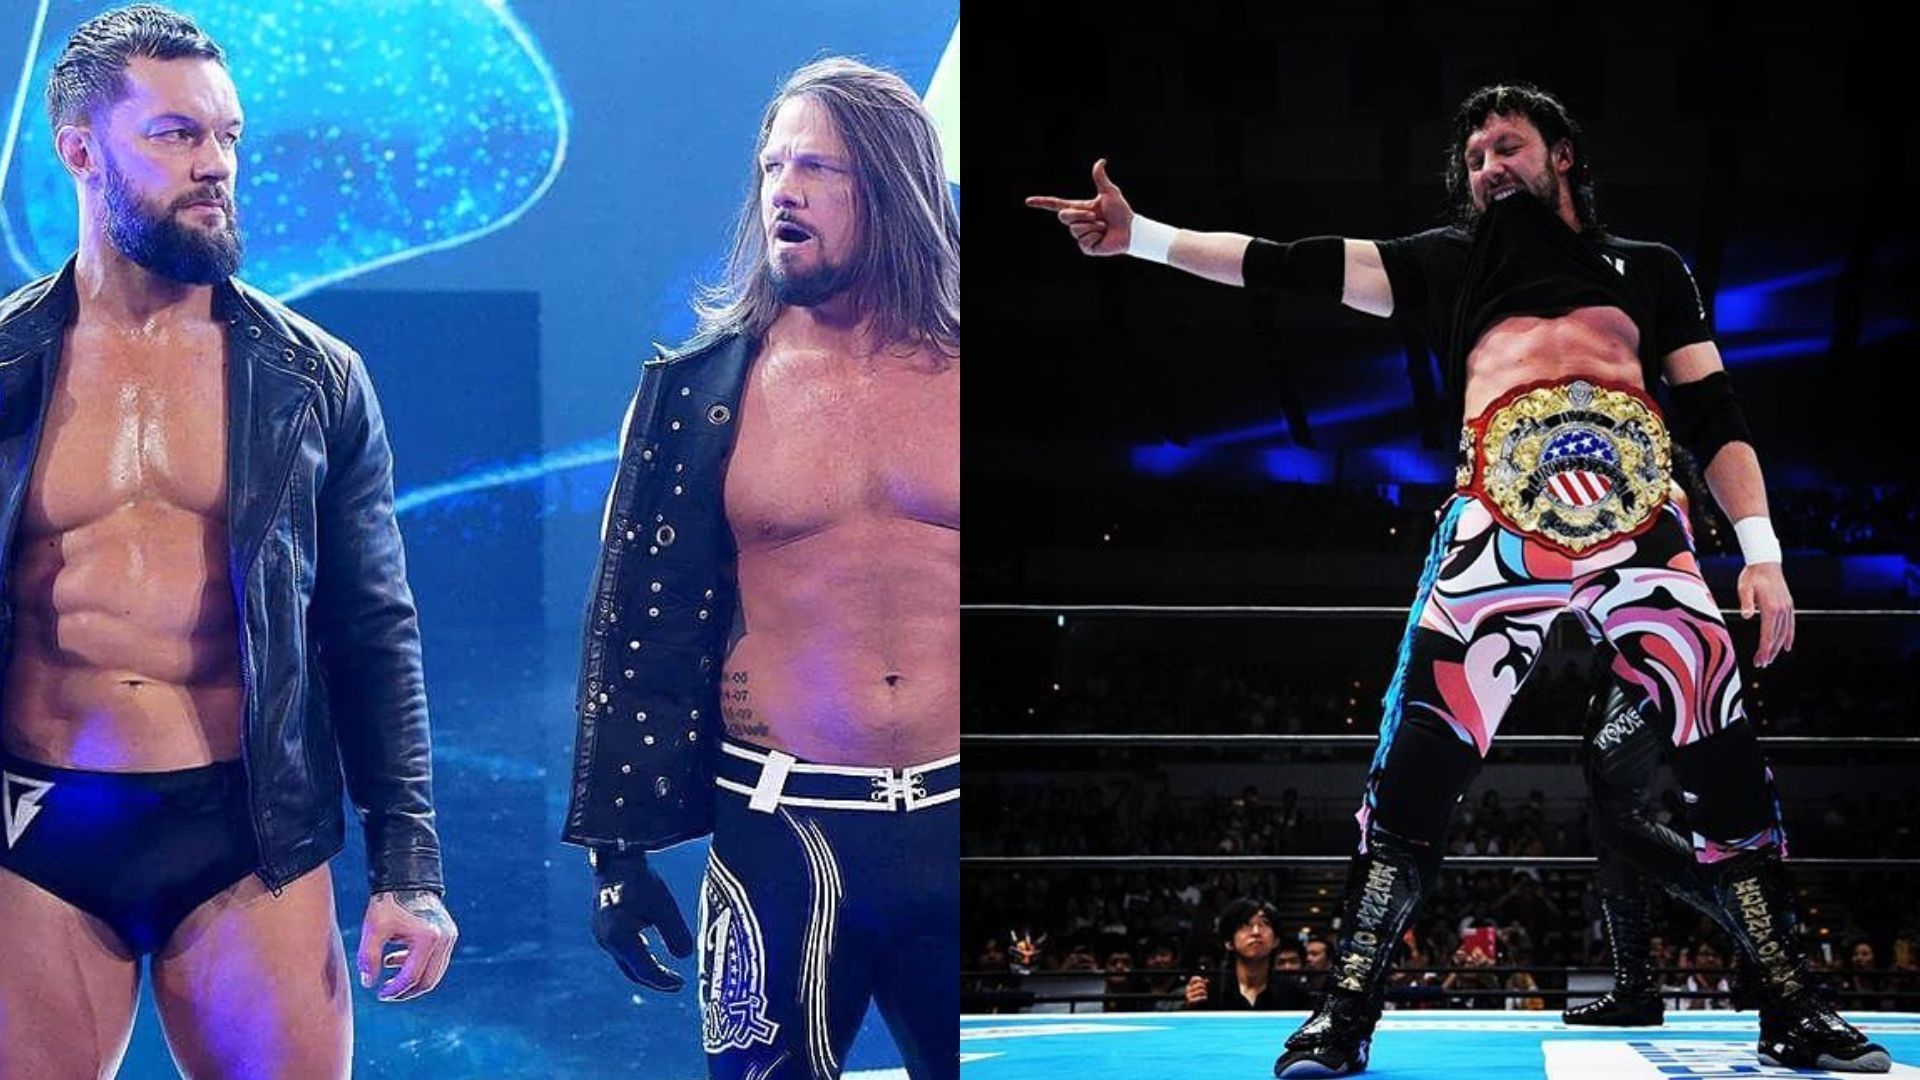 AJ Styles and Finn Balor are former members of the Bullet Club